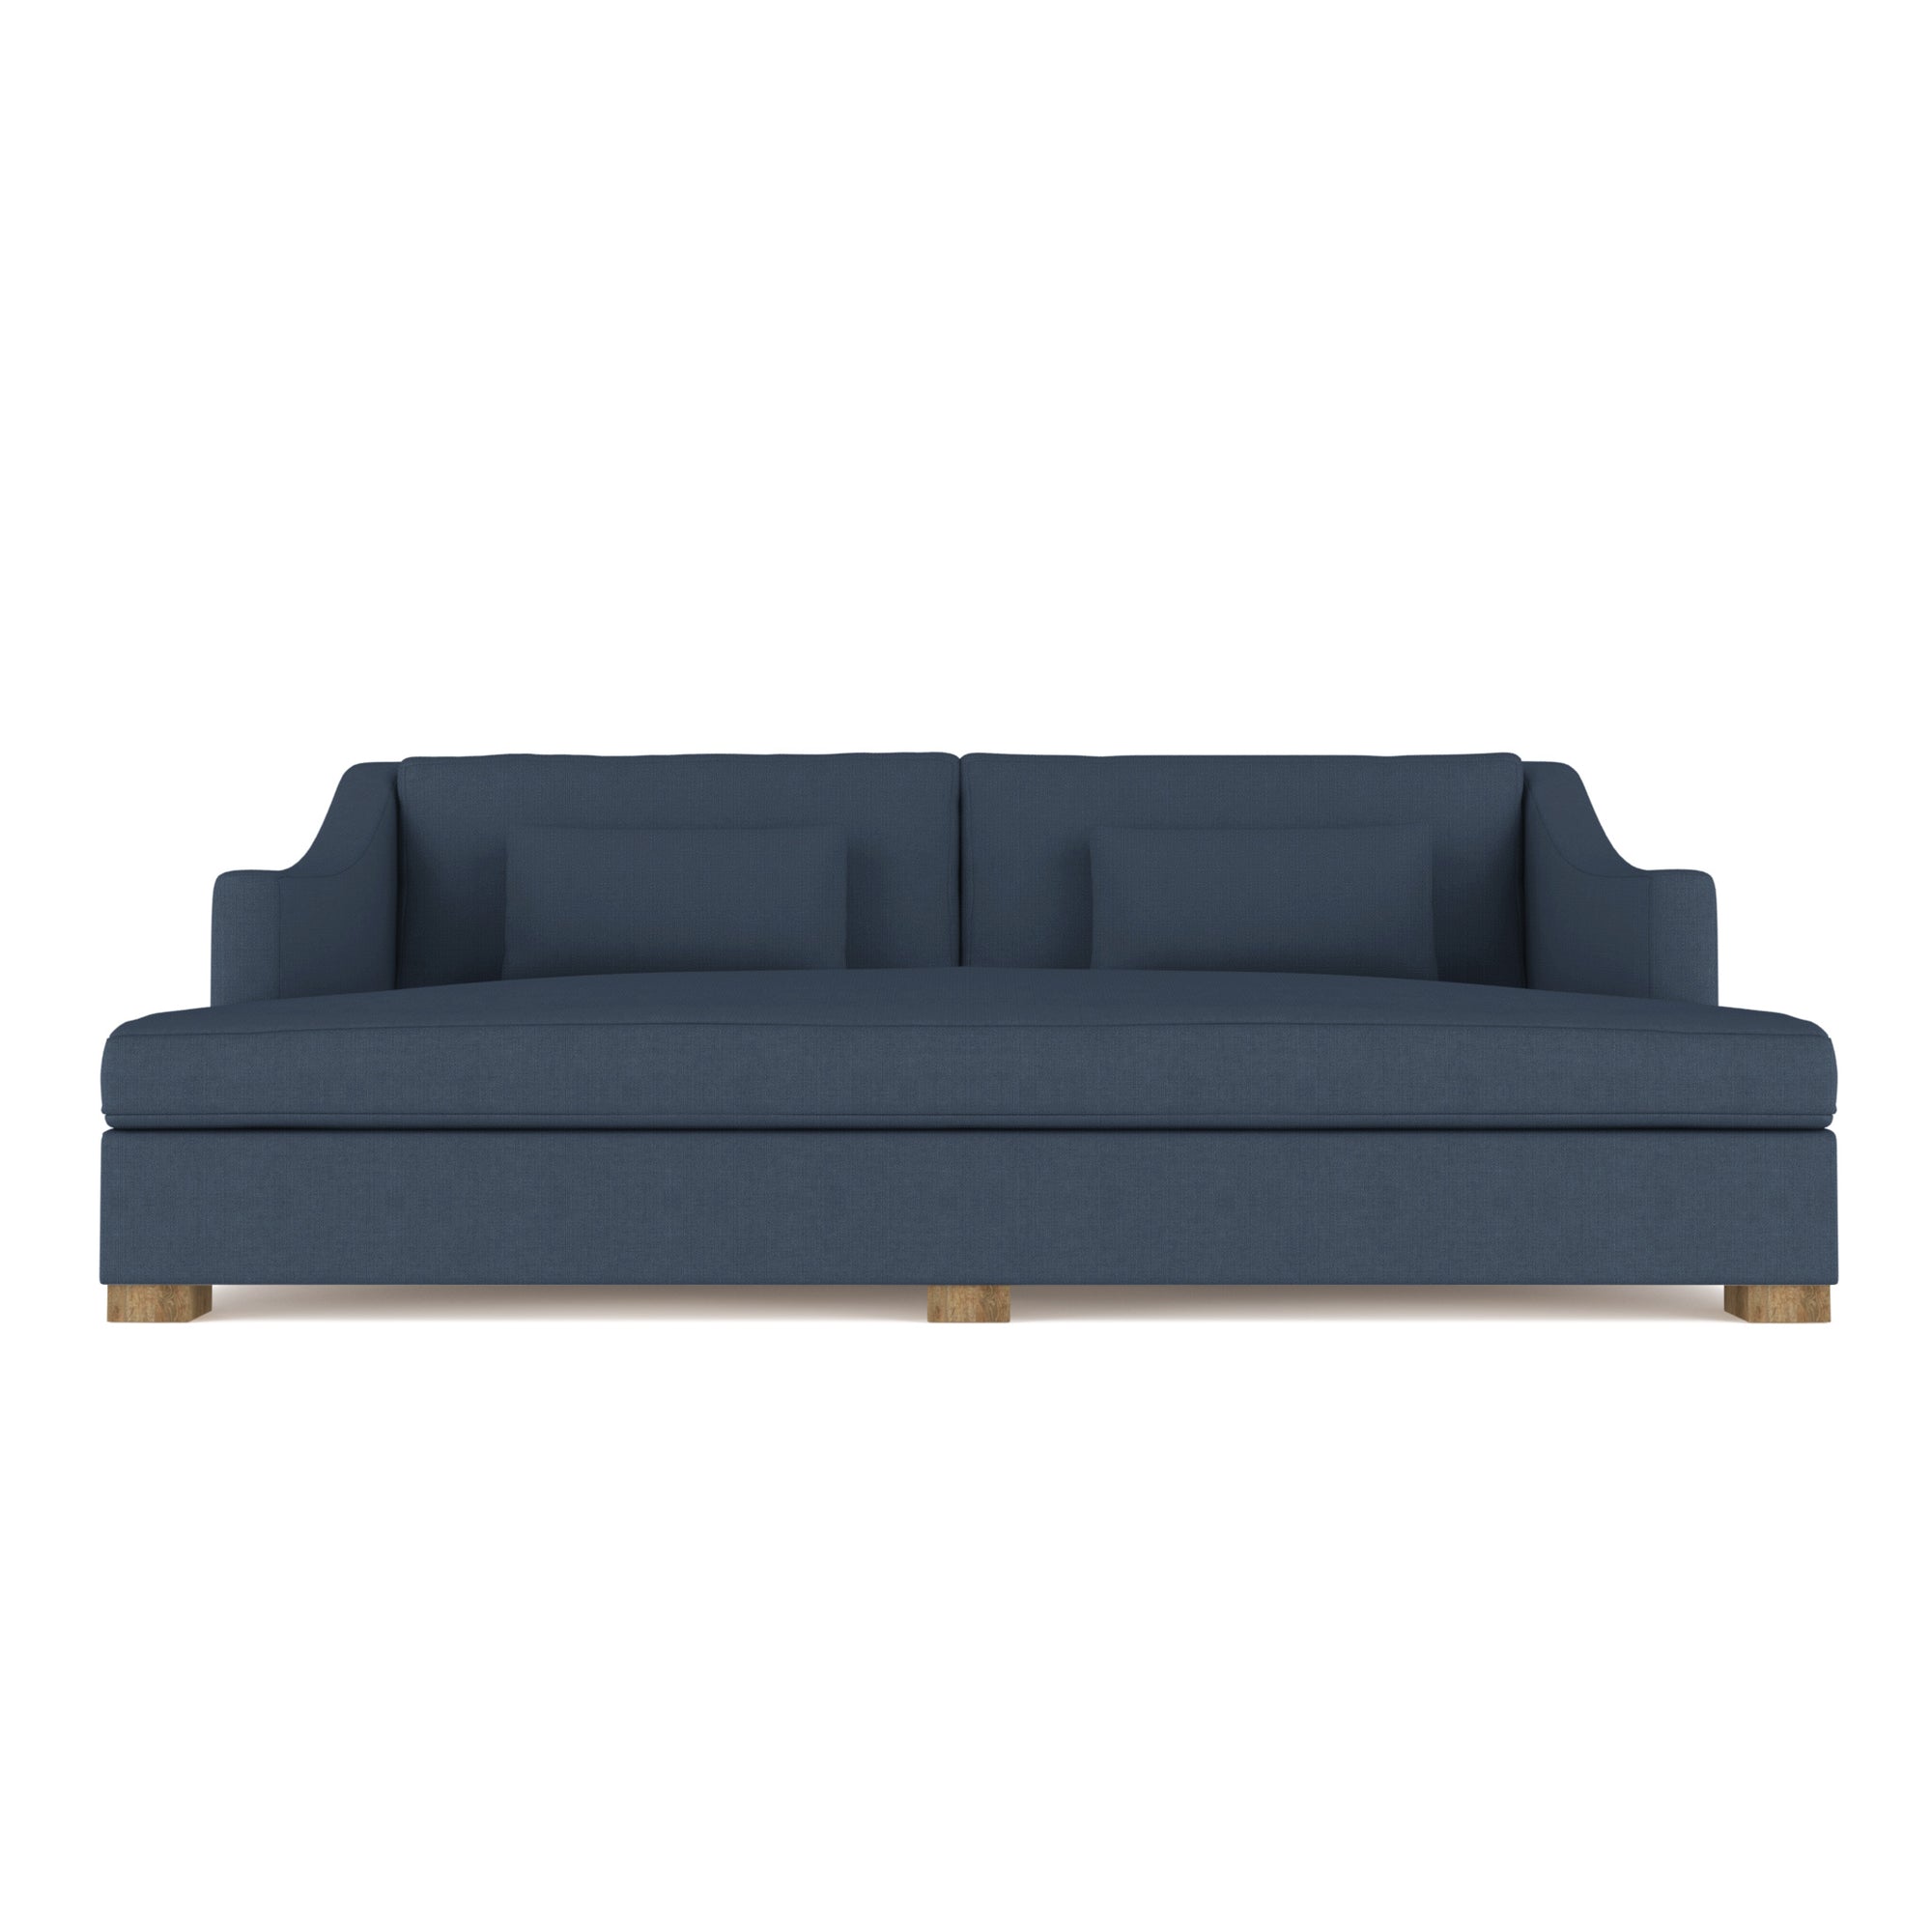 Crosby Daybed - Bluebell Box Weave Linen